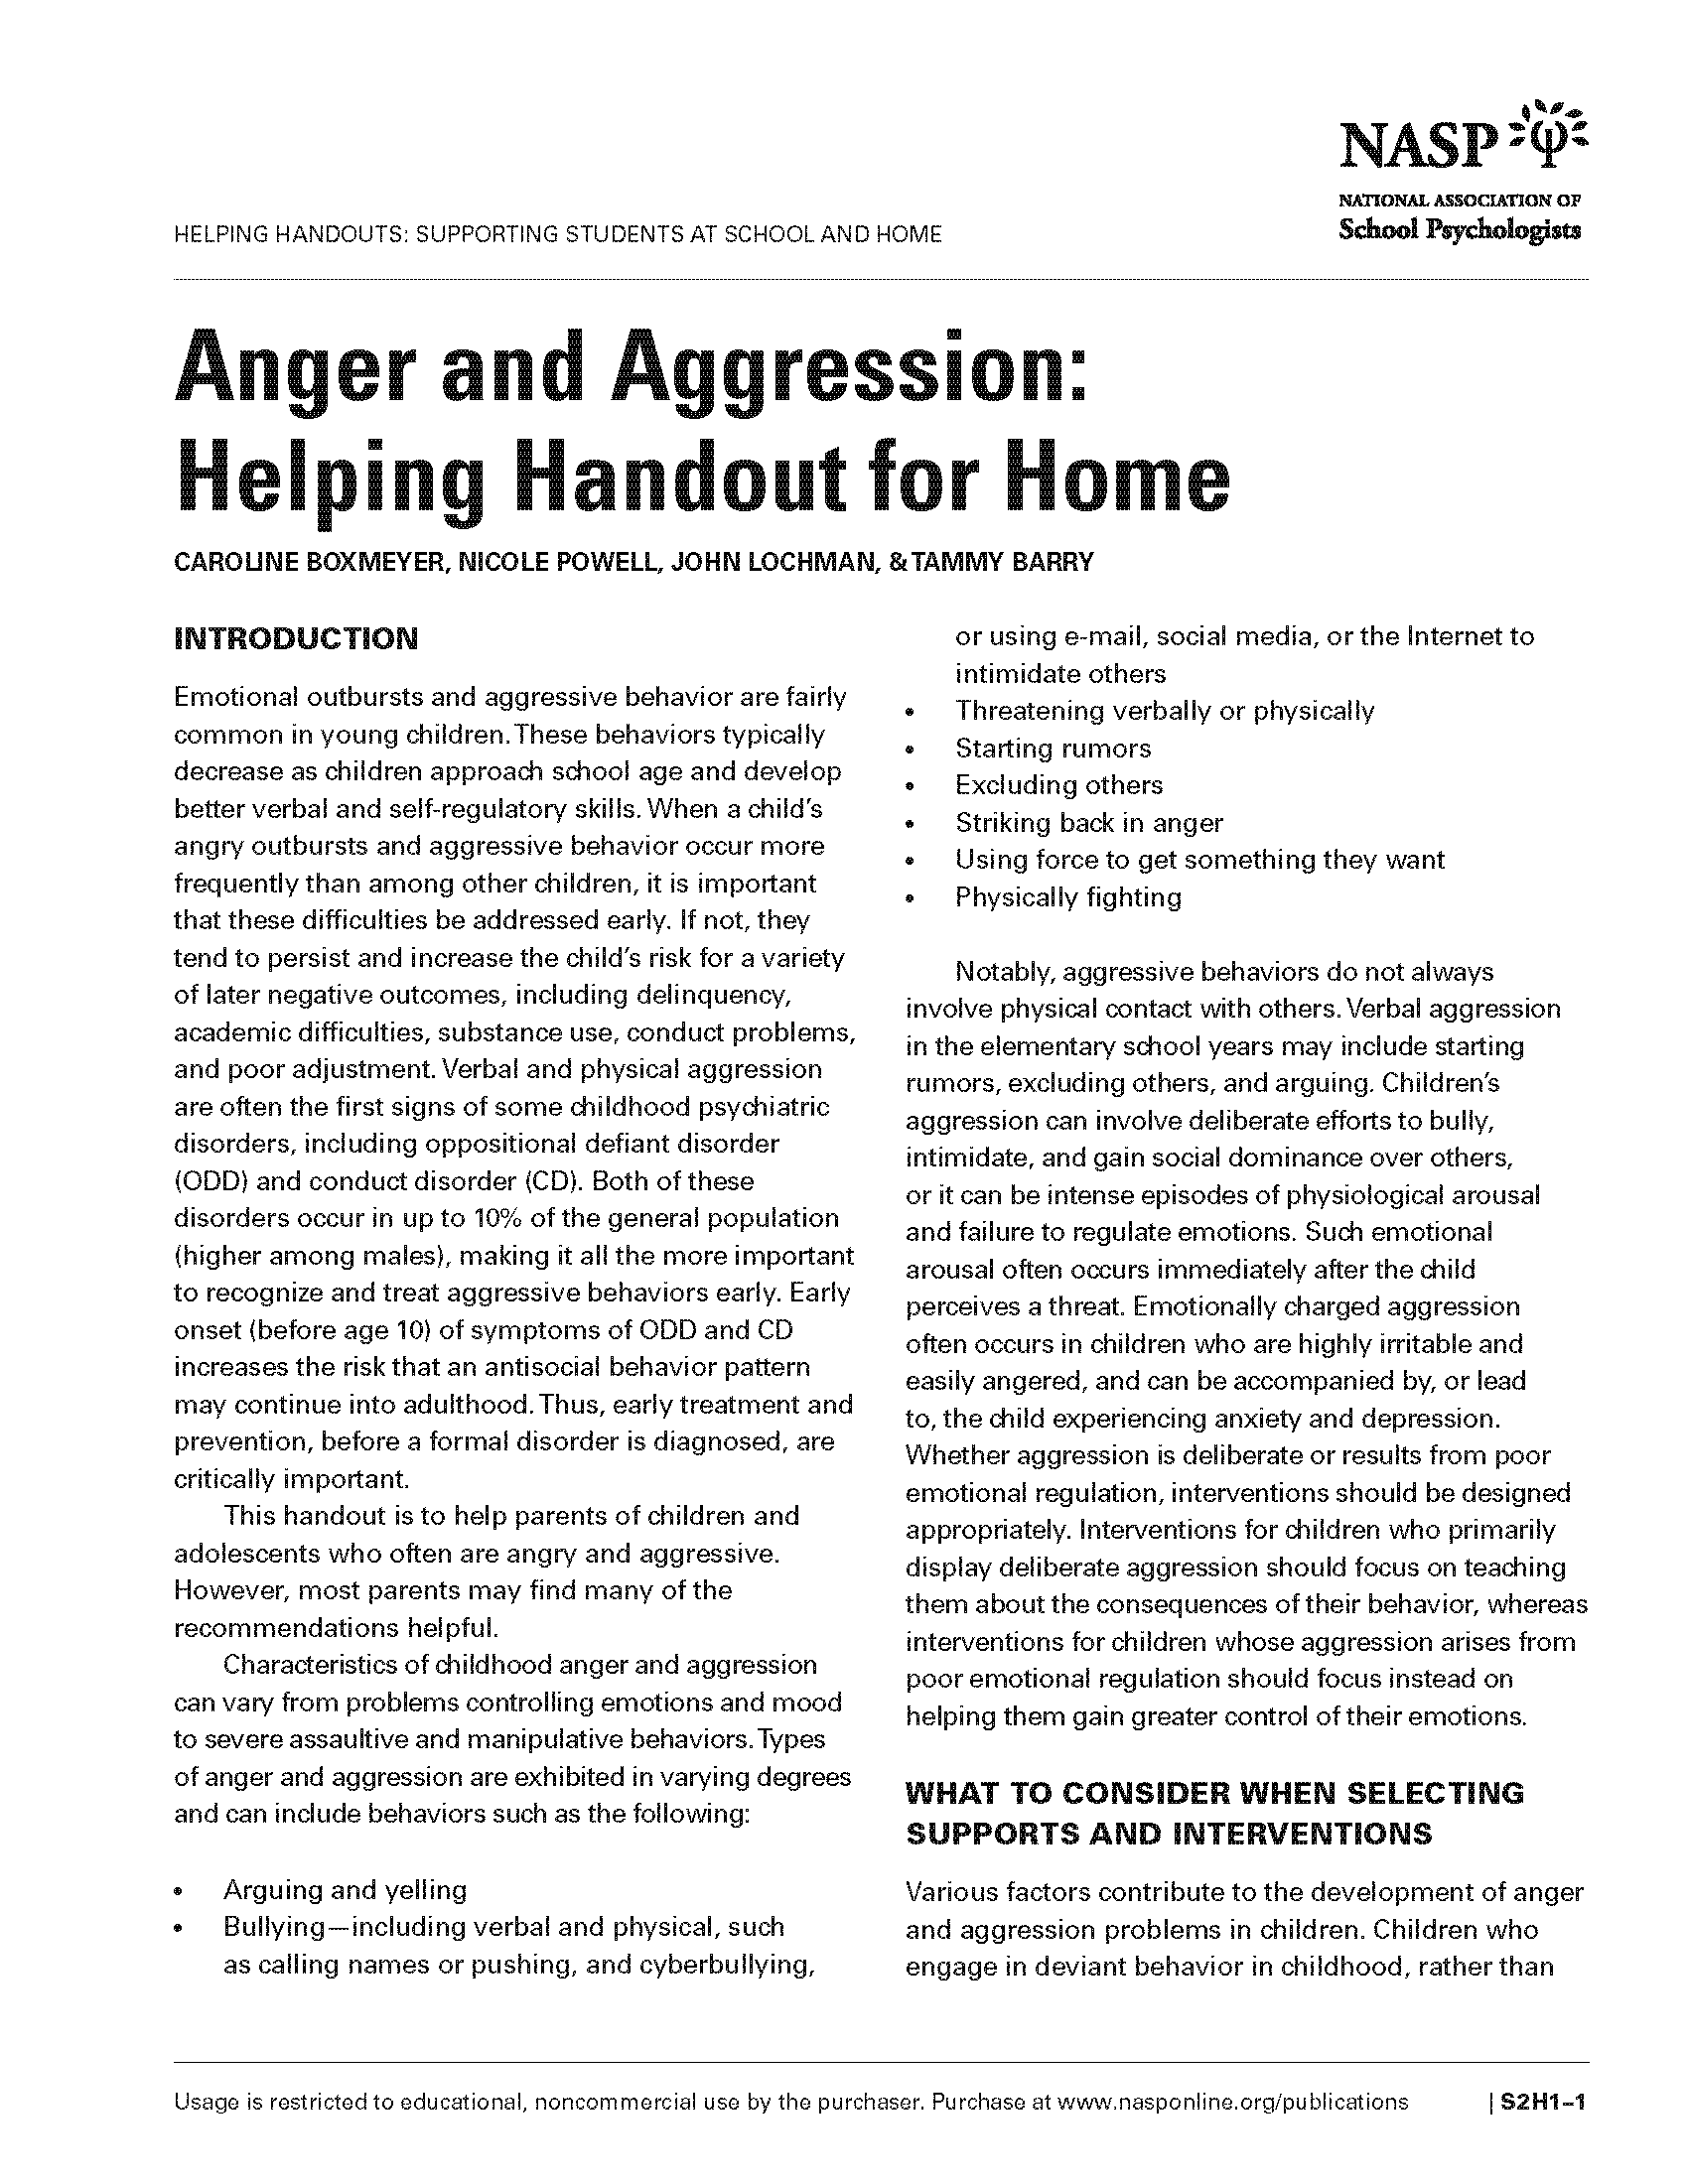 Anger and Aggression: Helping Handout for Home